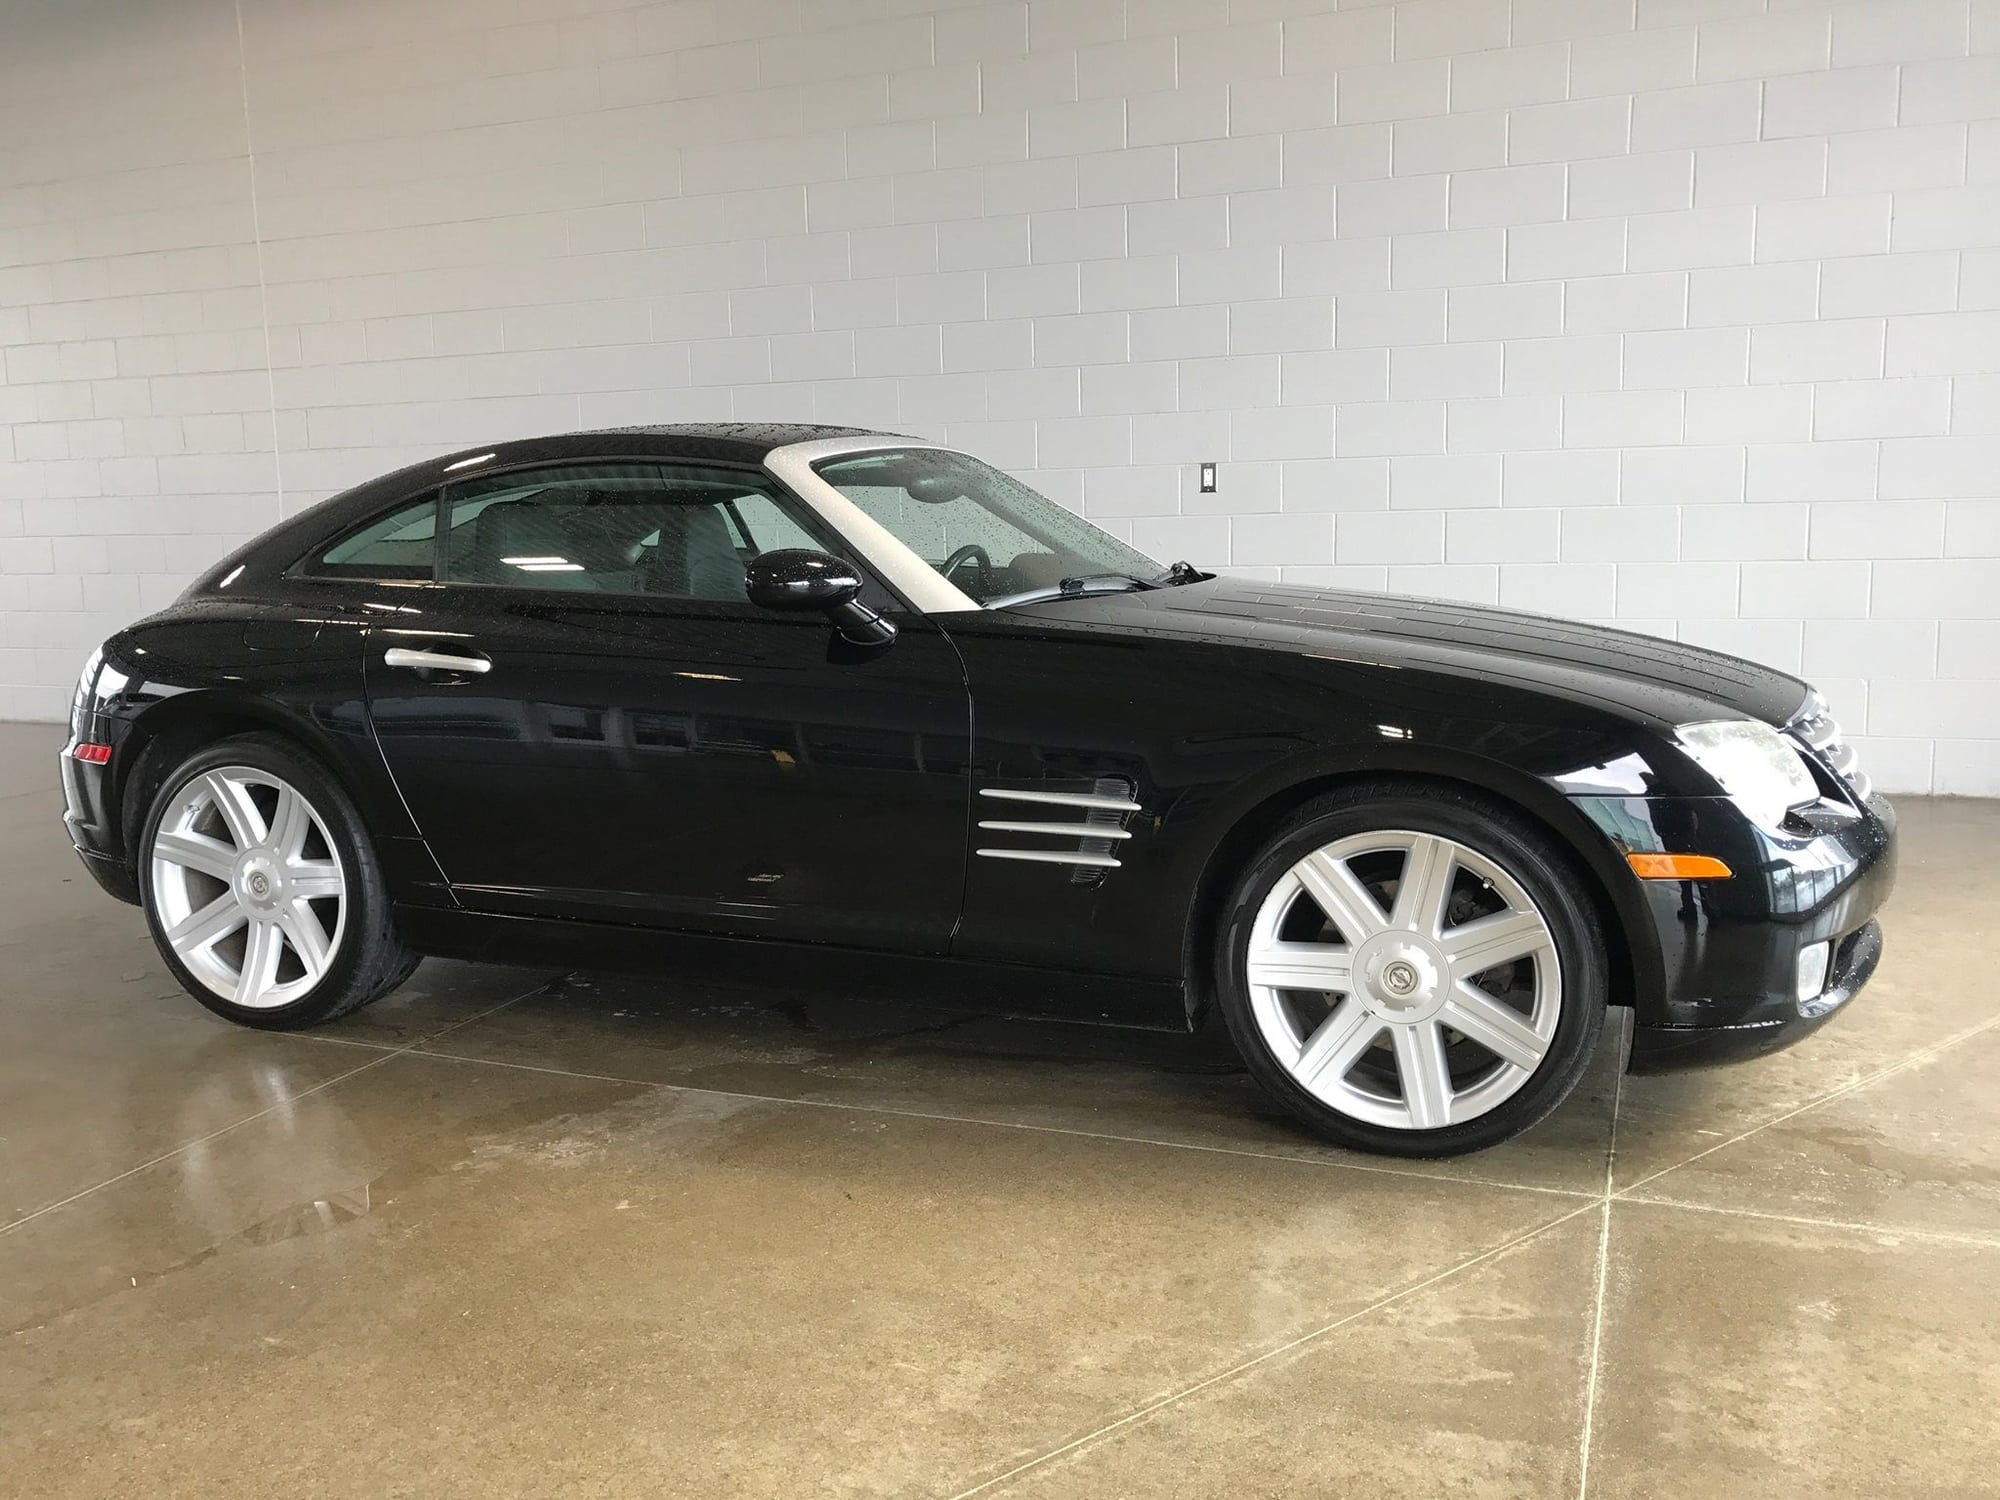 2004 Chrysler Crossfire - 2004 Crossfire never driven in the winter. - Used - VIN 1C3AN69L54X022616 - 88,000 Miles - 6 cyl - 2WD - Manual - Coupe - Black - Maybee, MI 48159, United States